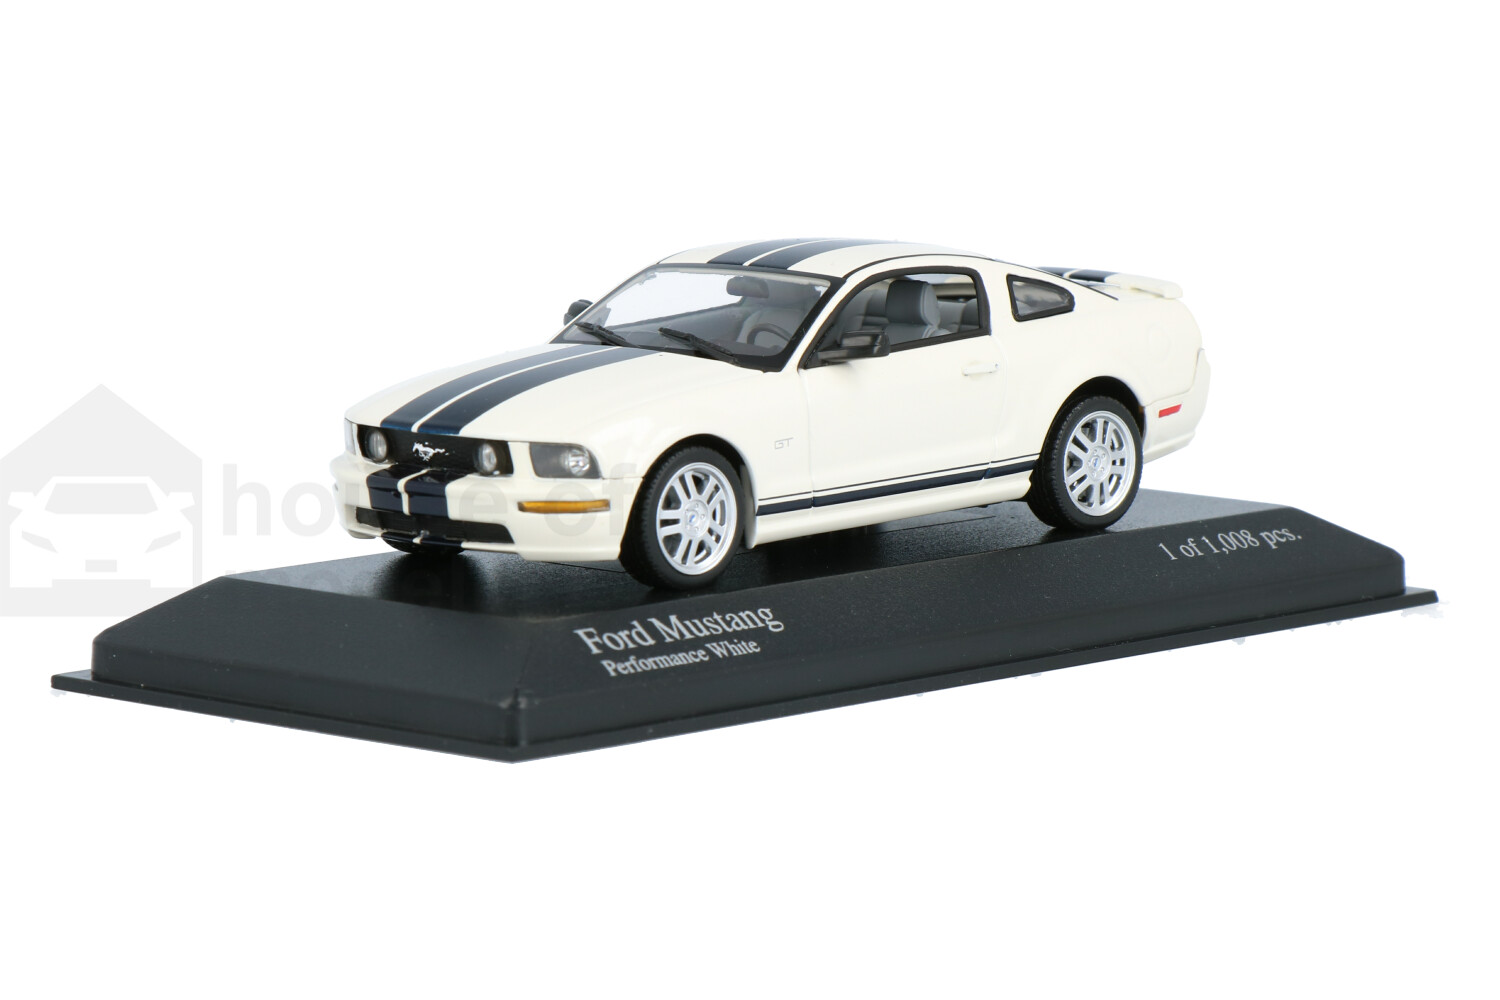 Ford-Mustang-400084124_13154012138080454-MinichampsFord-Mustang-400084124_Houseofmodelcars_.jpg